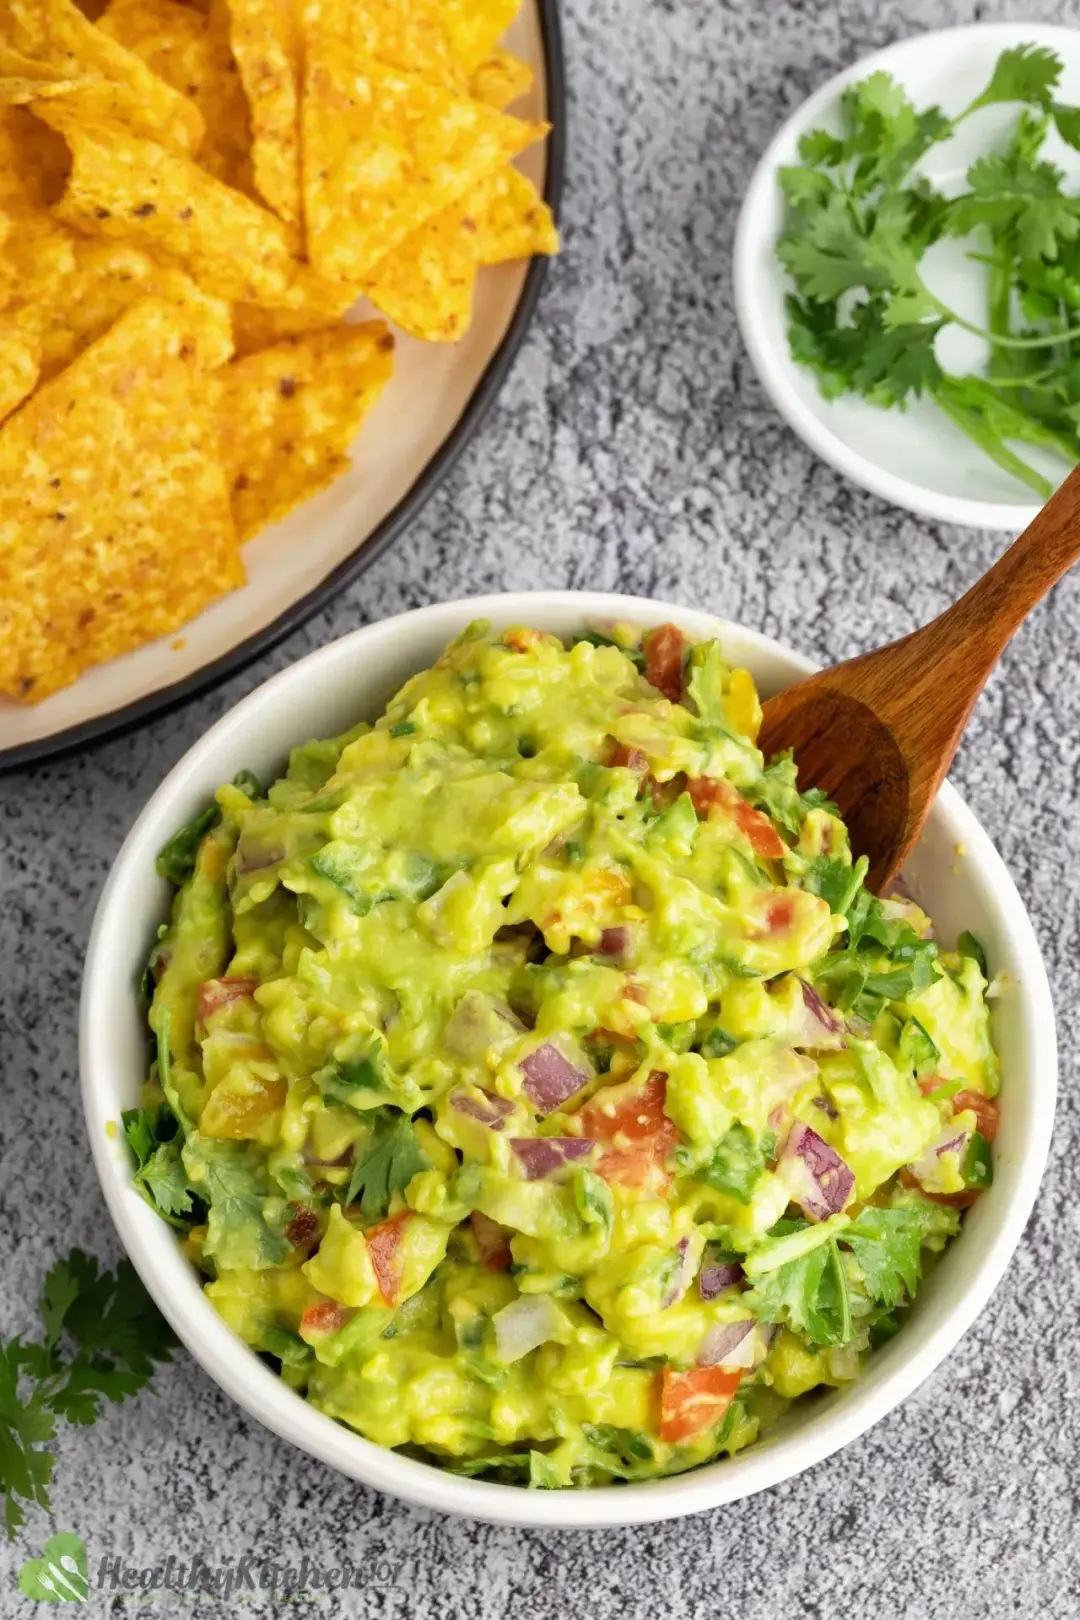 Is It Okay To Eat Guacamole That Has Turned Brown